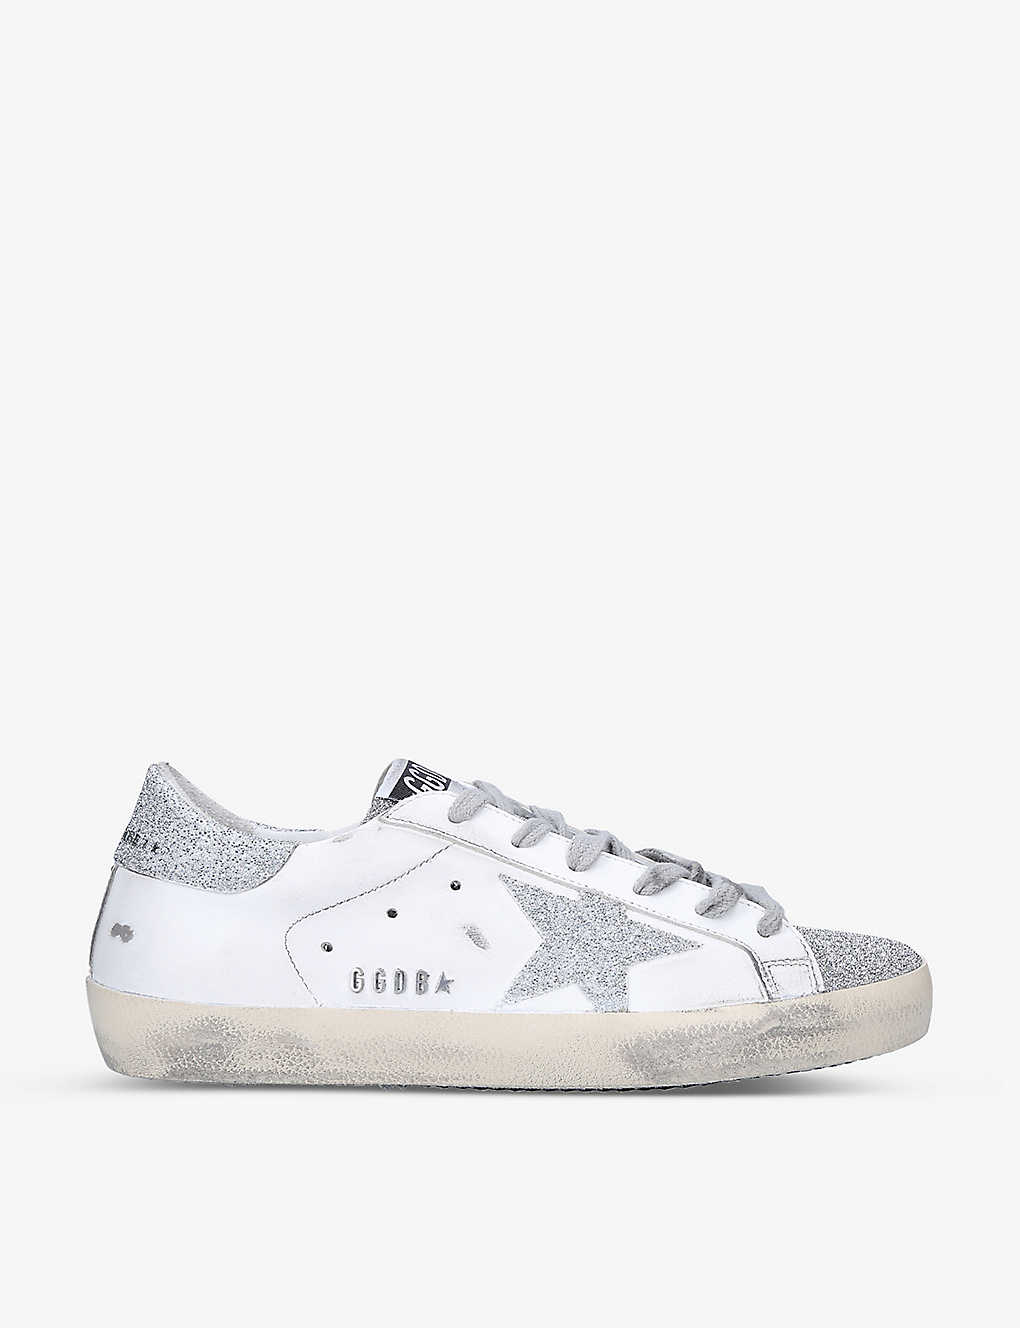 Golden Goose Superstar 80185 Leather And Glitter Trainers In White/oth